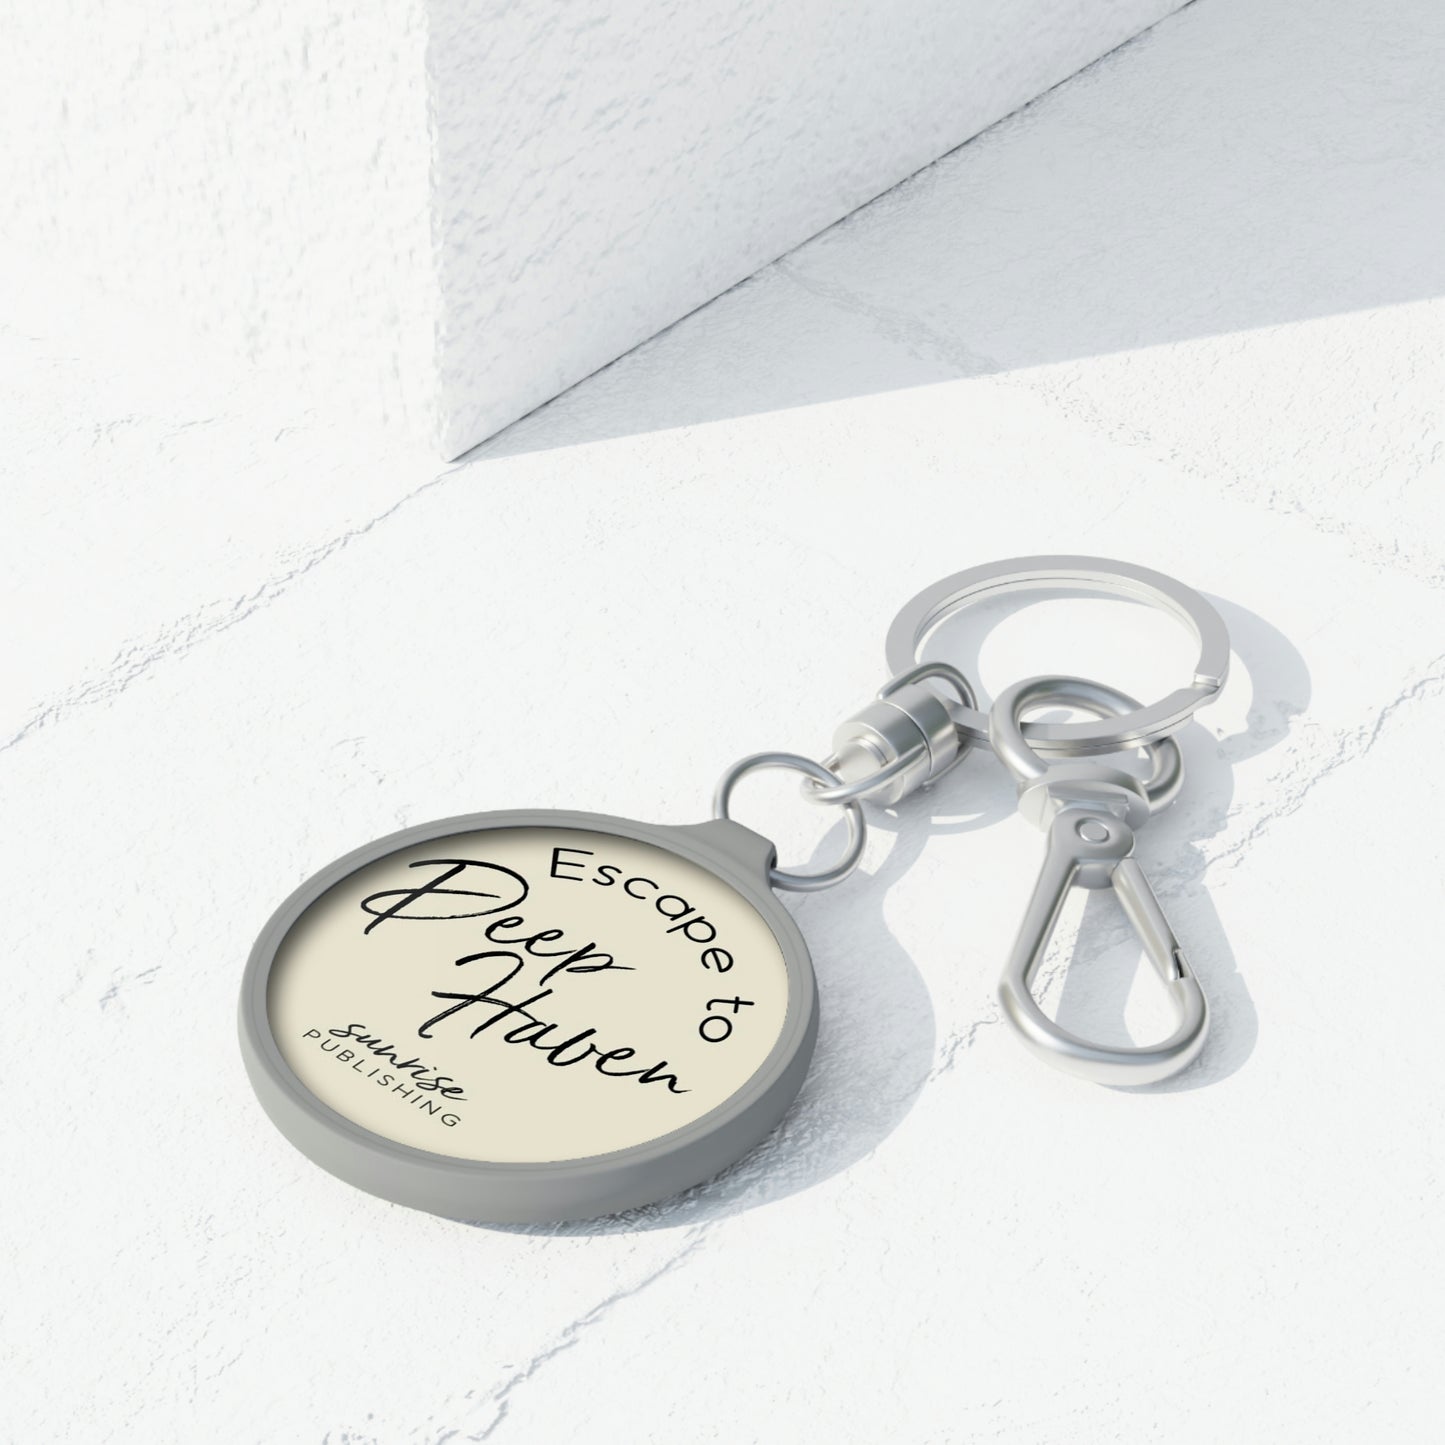 "Escape to Deep Haven" - Keyring Tag